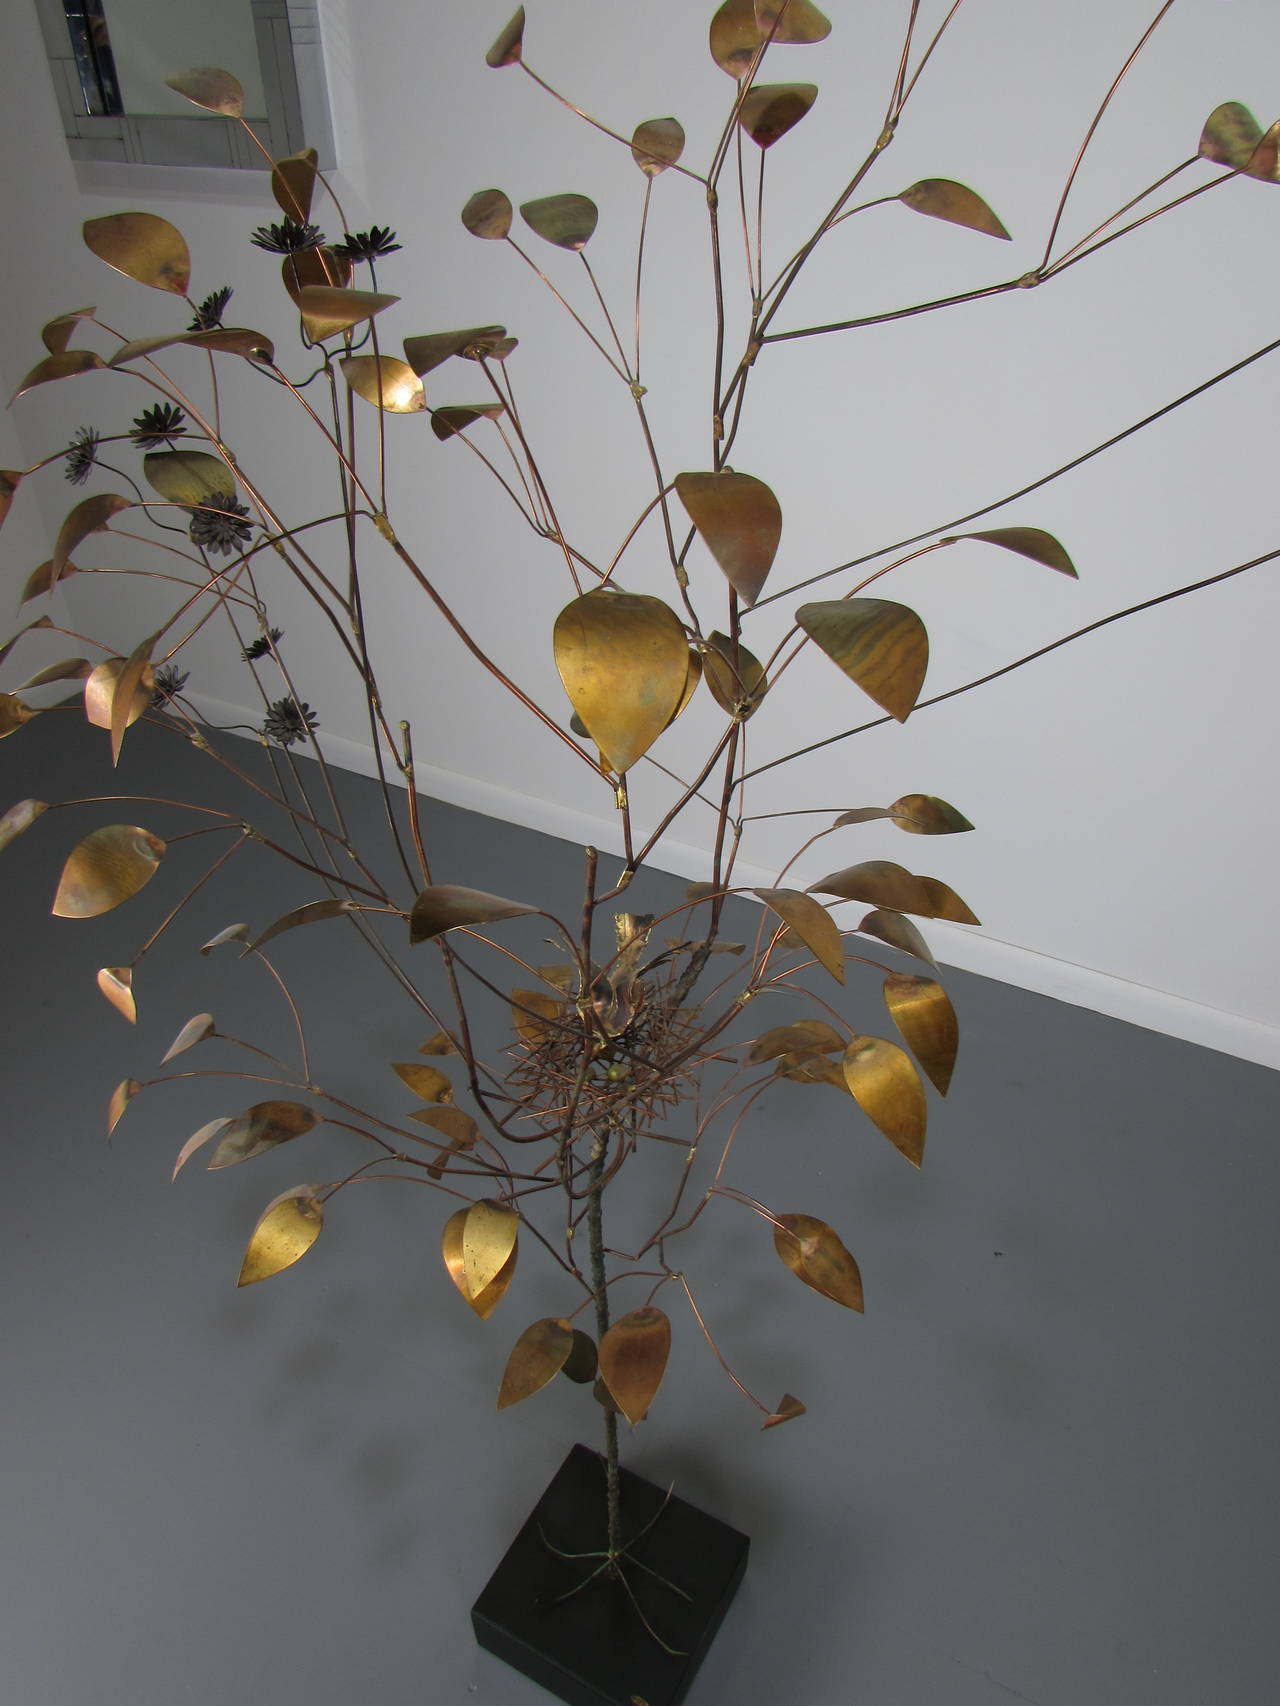 American Early Brass Floor Sculpture of Tree with Bird in Nest by Curtis Jere, 1969